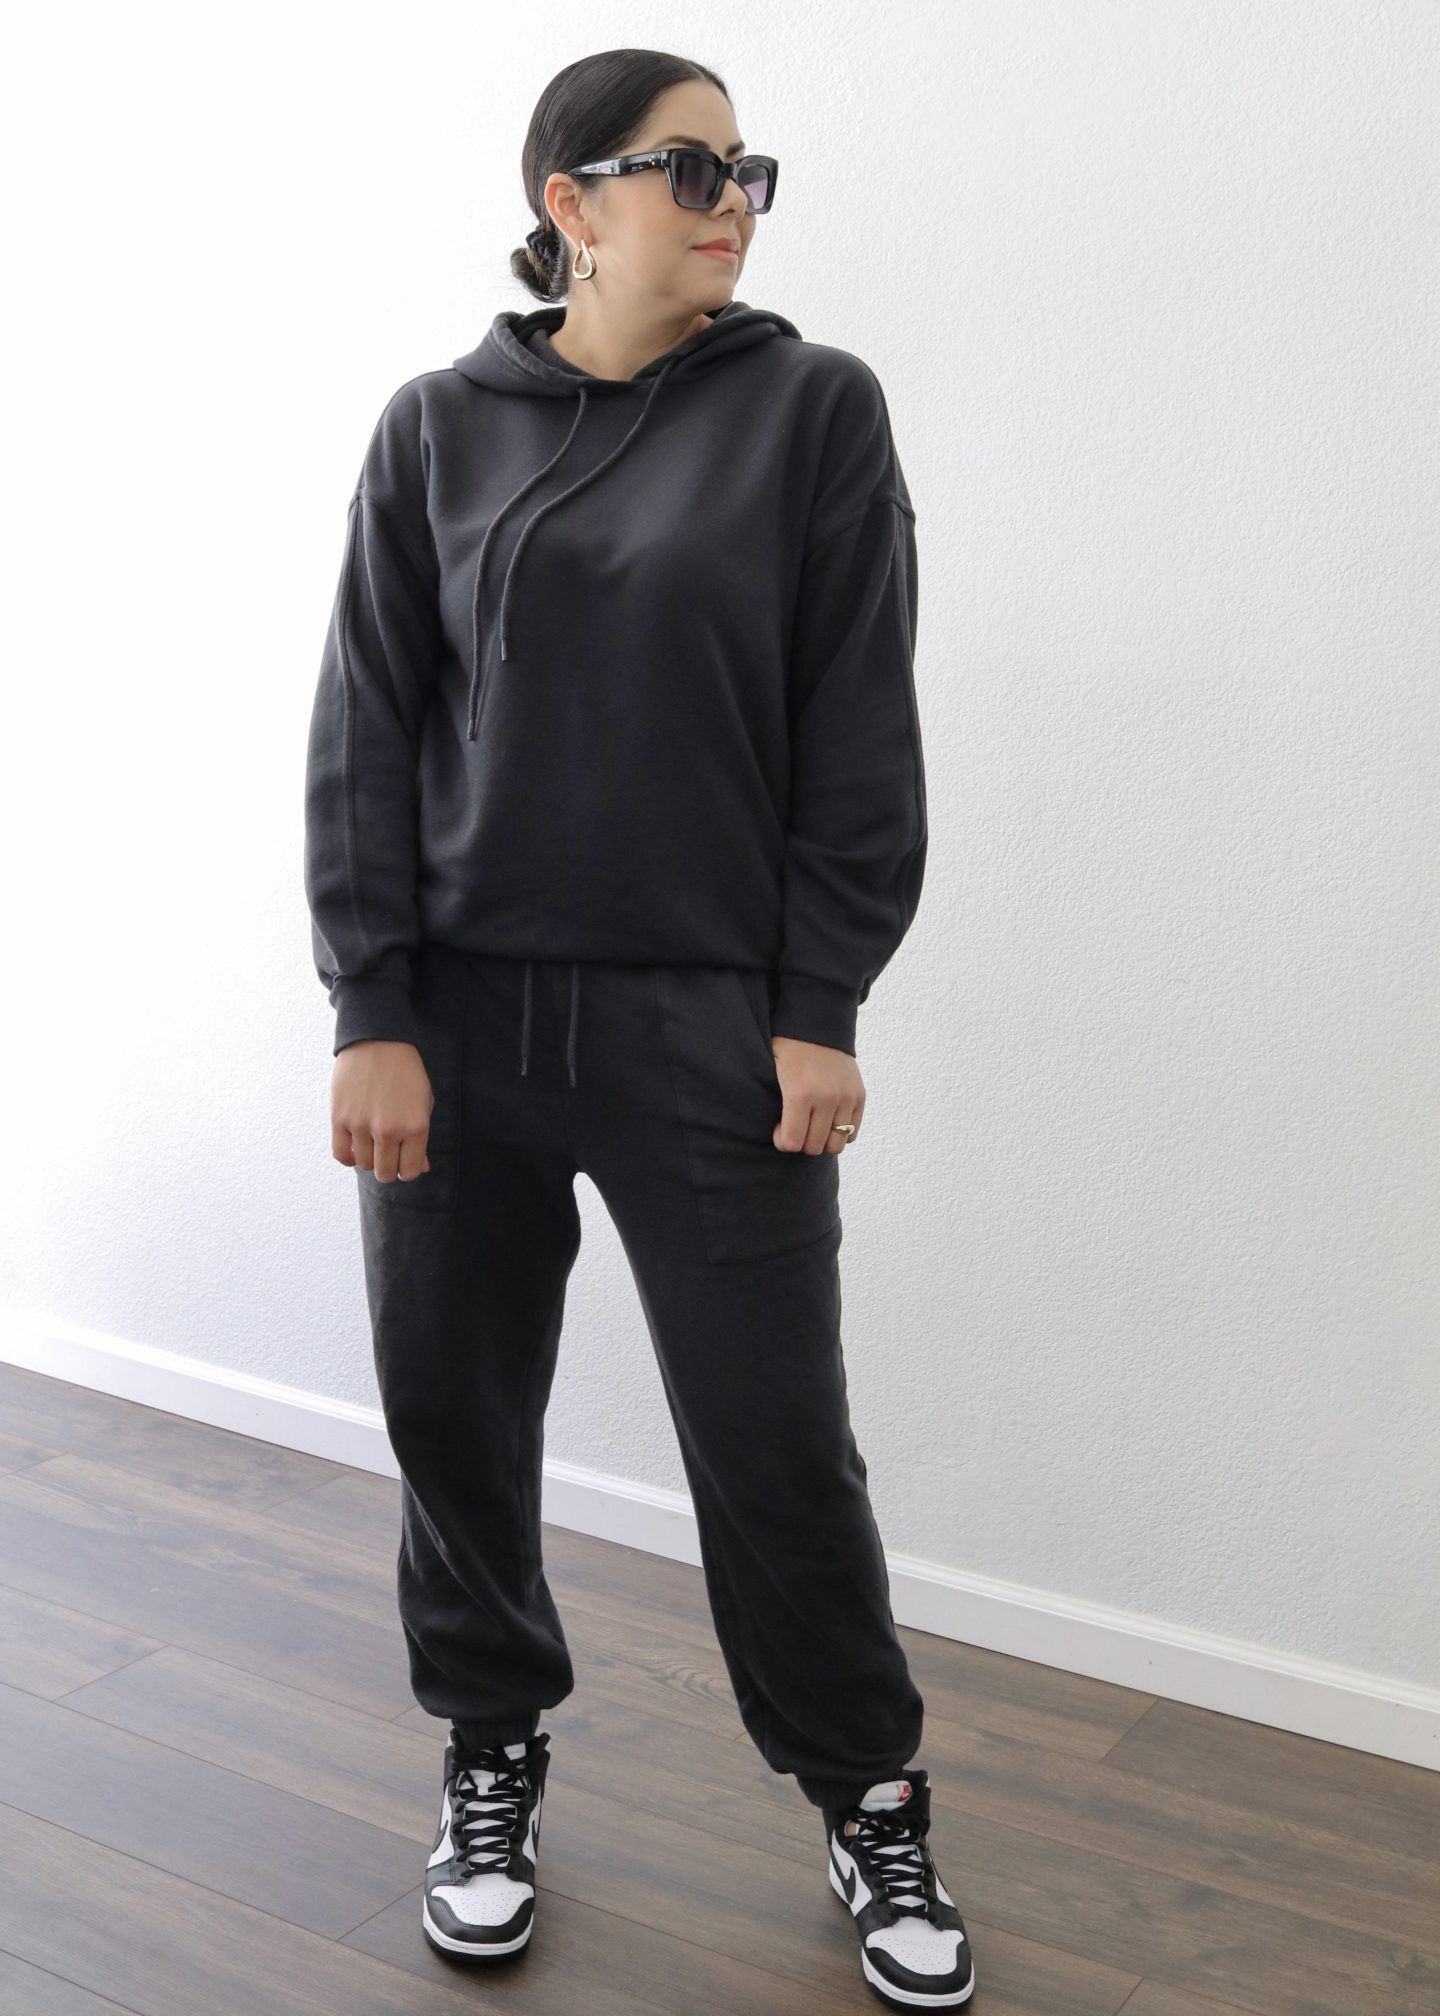 comfortable sweatsuit outfit for women, stylish black sweatsuit for women, how to style sweatshirt and sweatpants for women